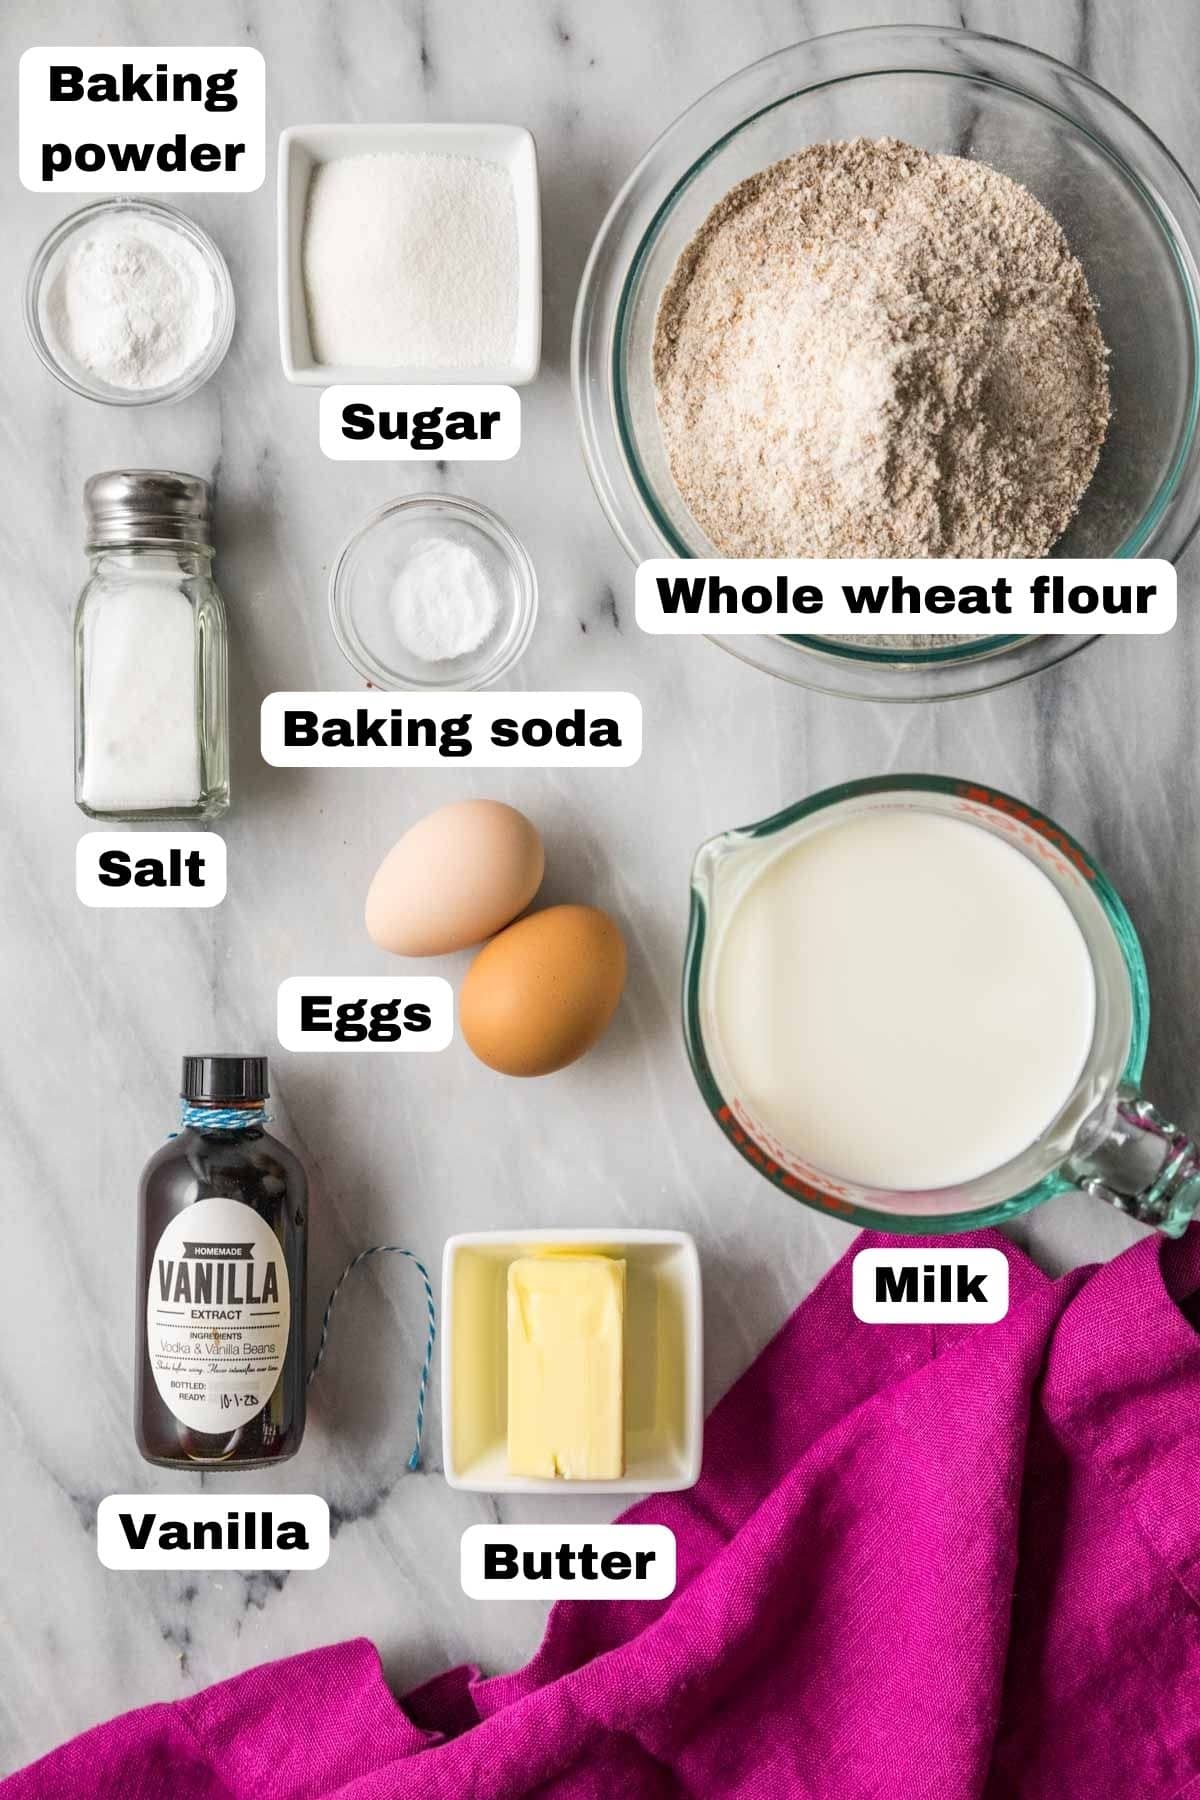 Overhead view of labelled ingredients including whole wheat flour, butter, milk, and more.